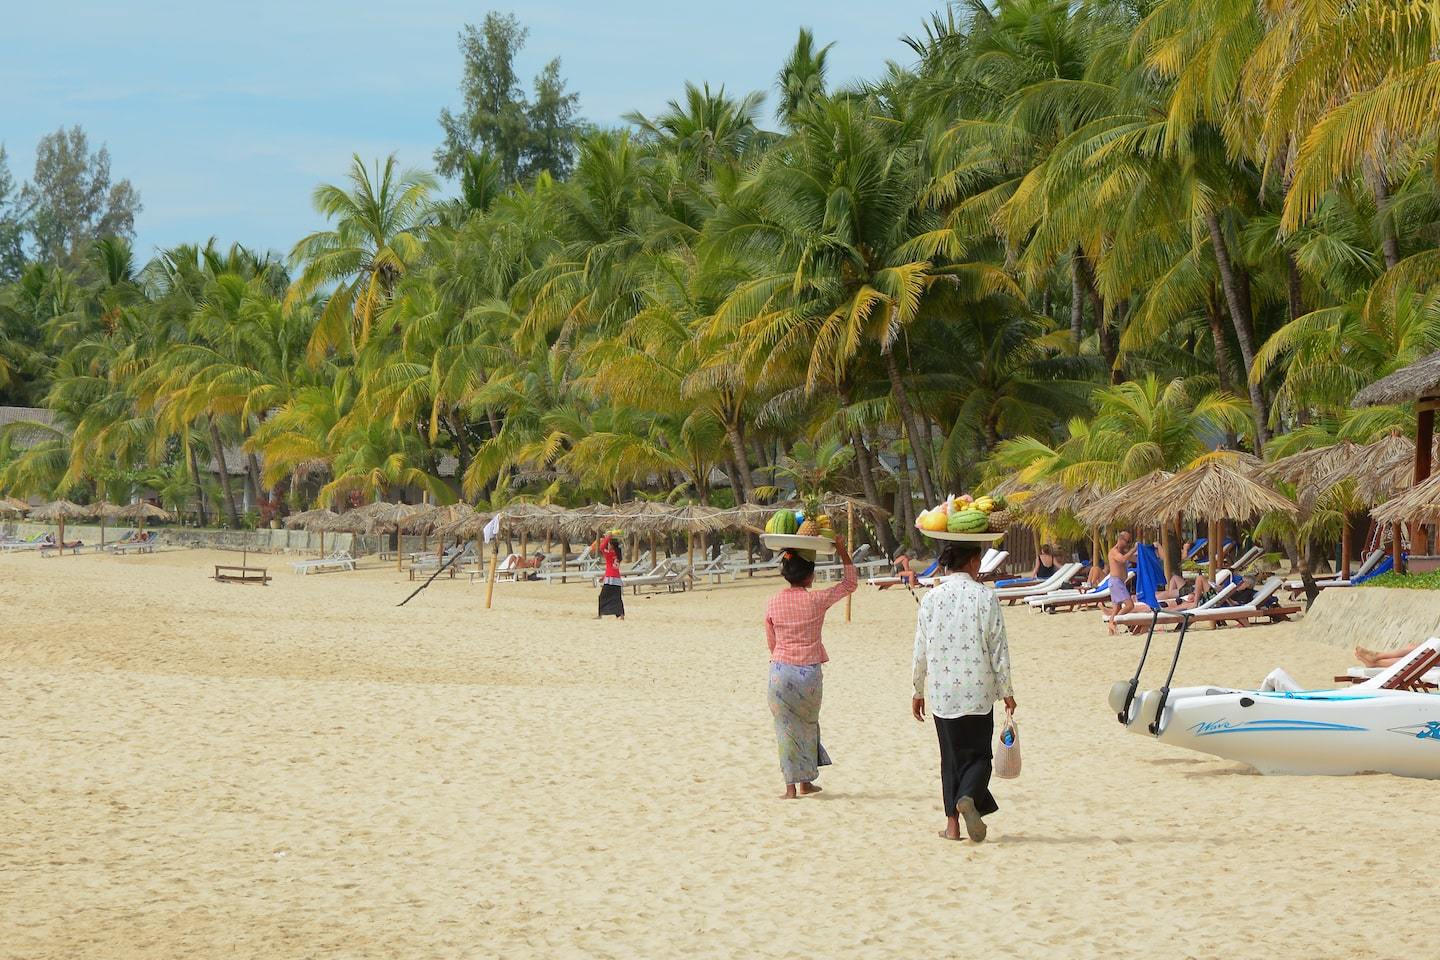 women walking with fruit baskets on their head along a beach with palm trees